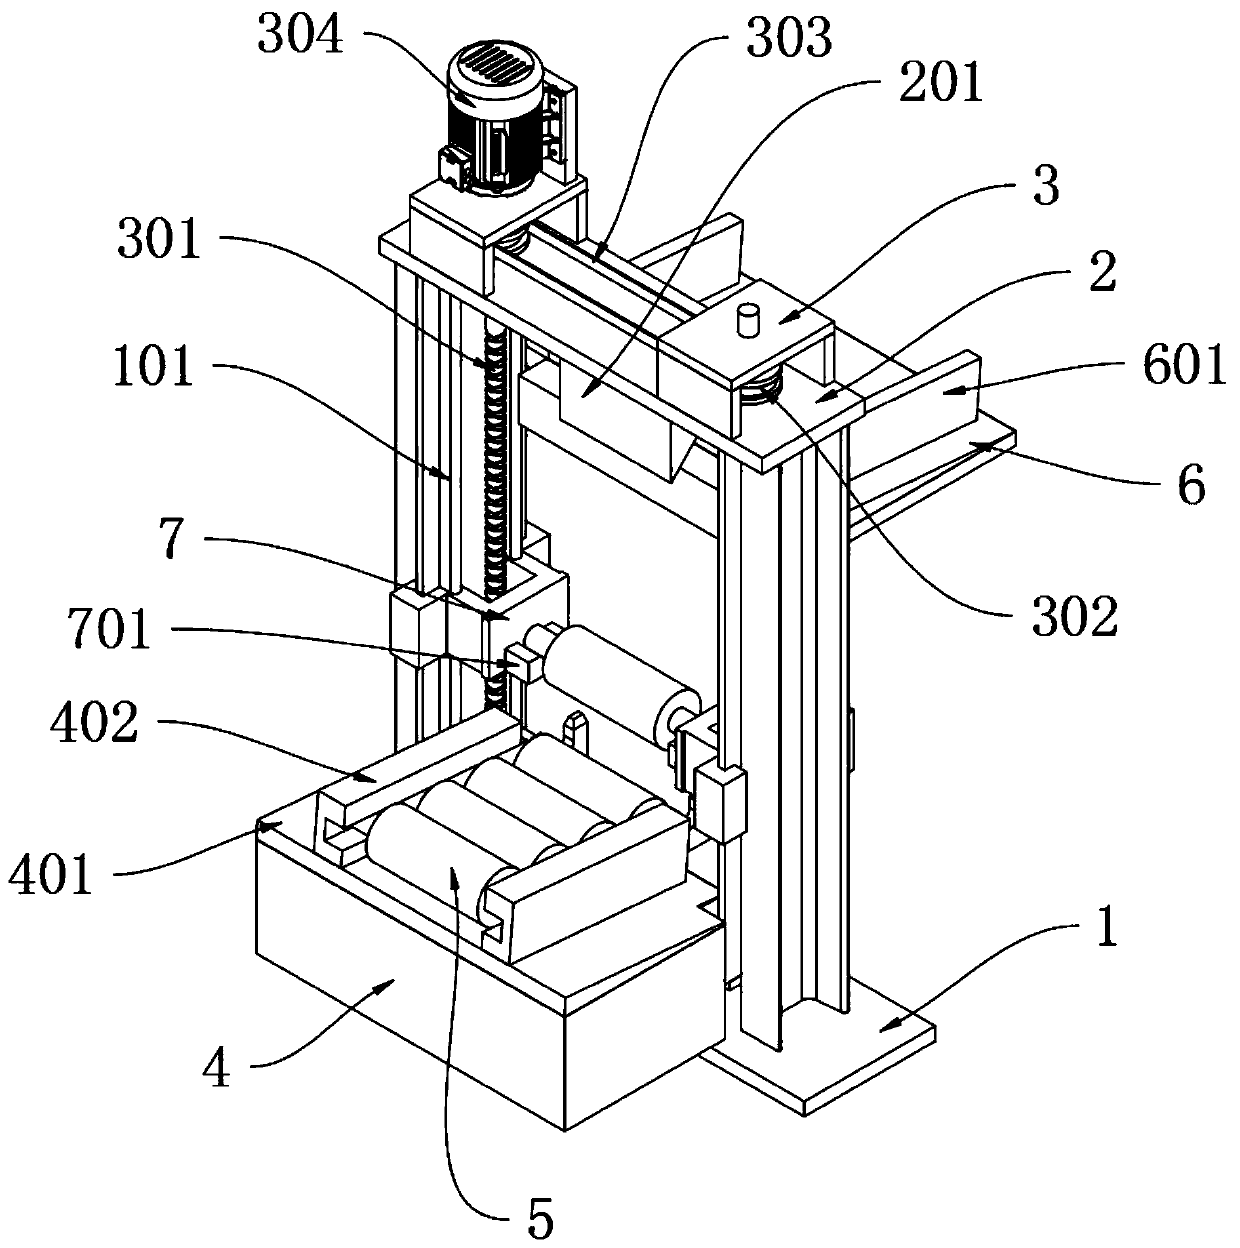 Intermittent automatic lifting and transferring device for roll shaft machining